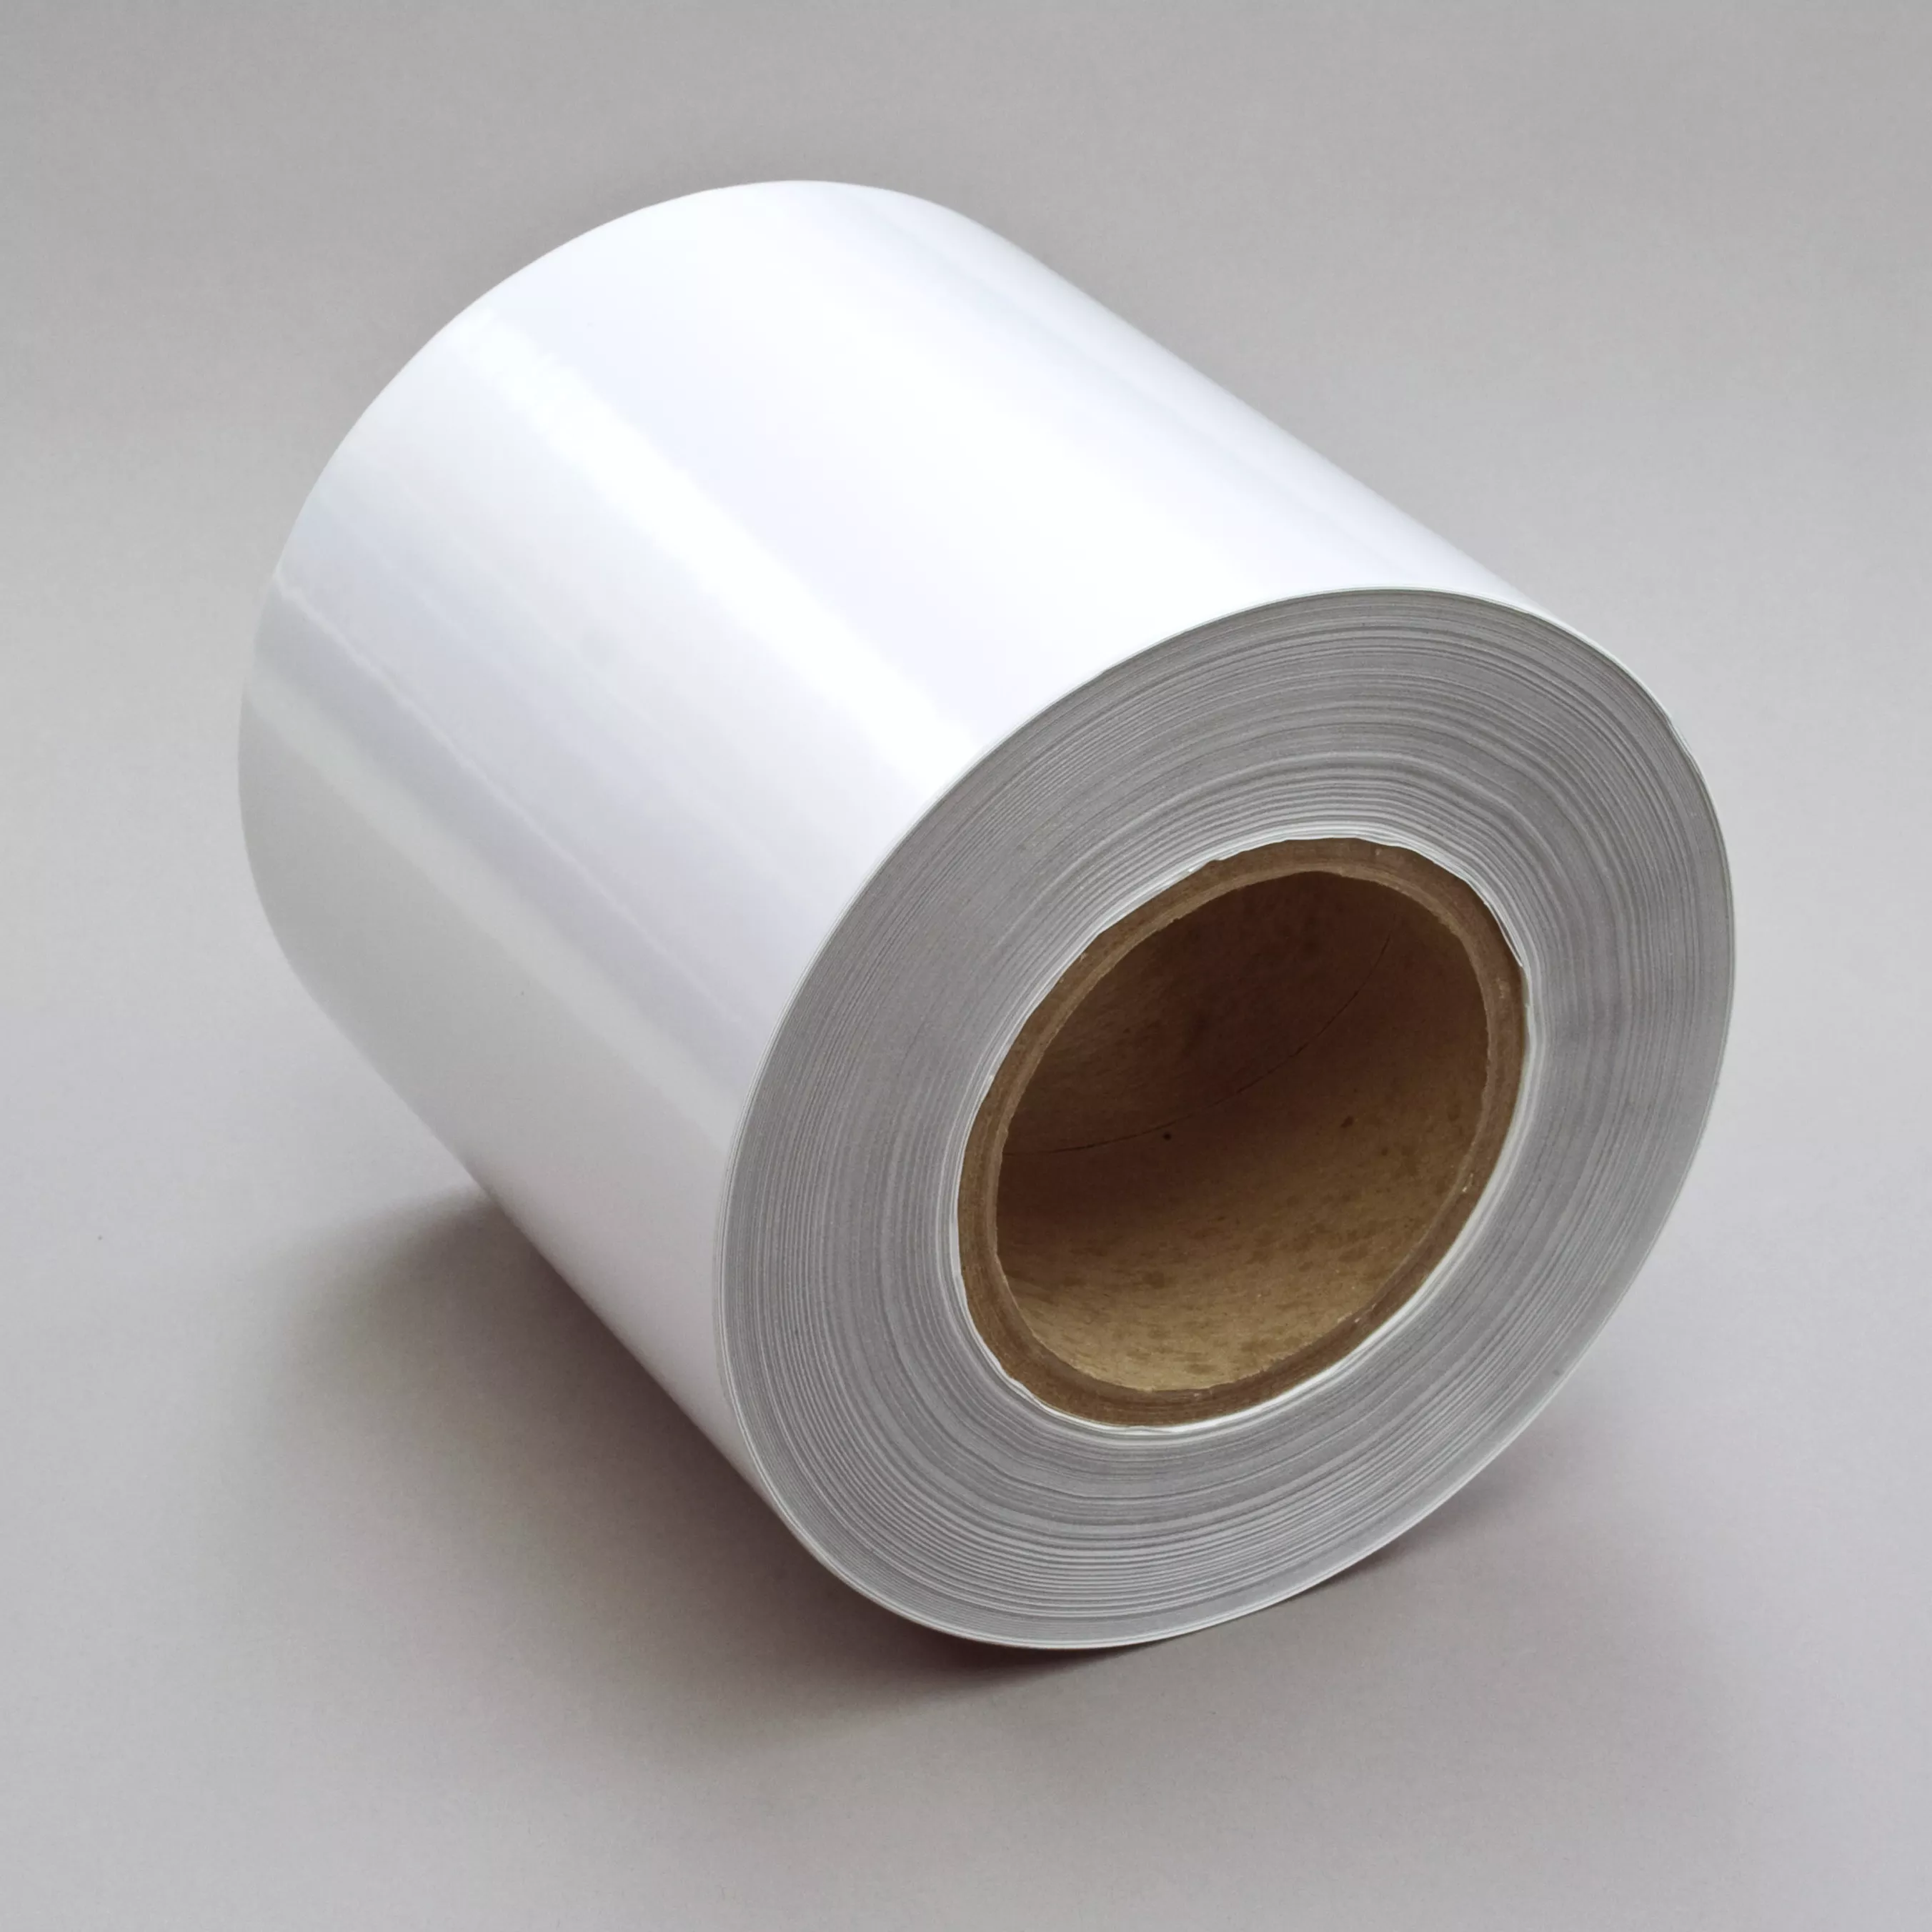 3M™ Thermal Transfer Label Material 7875, Platinum Polyester Gloss, 6 in
x 1668 ft, 1 Roll/Case